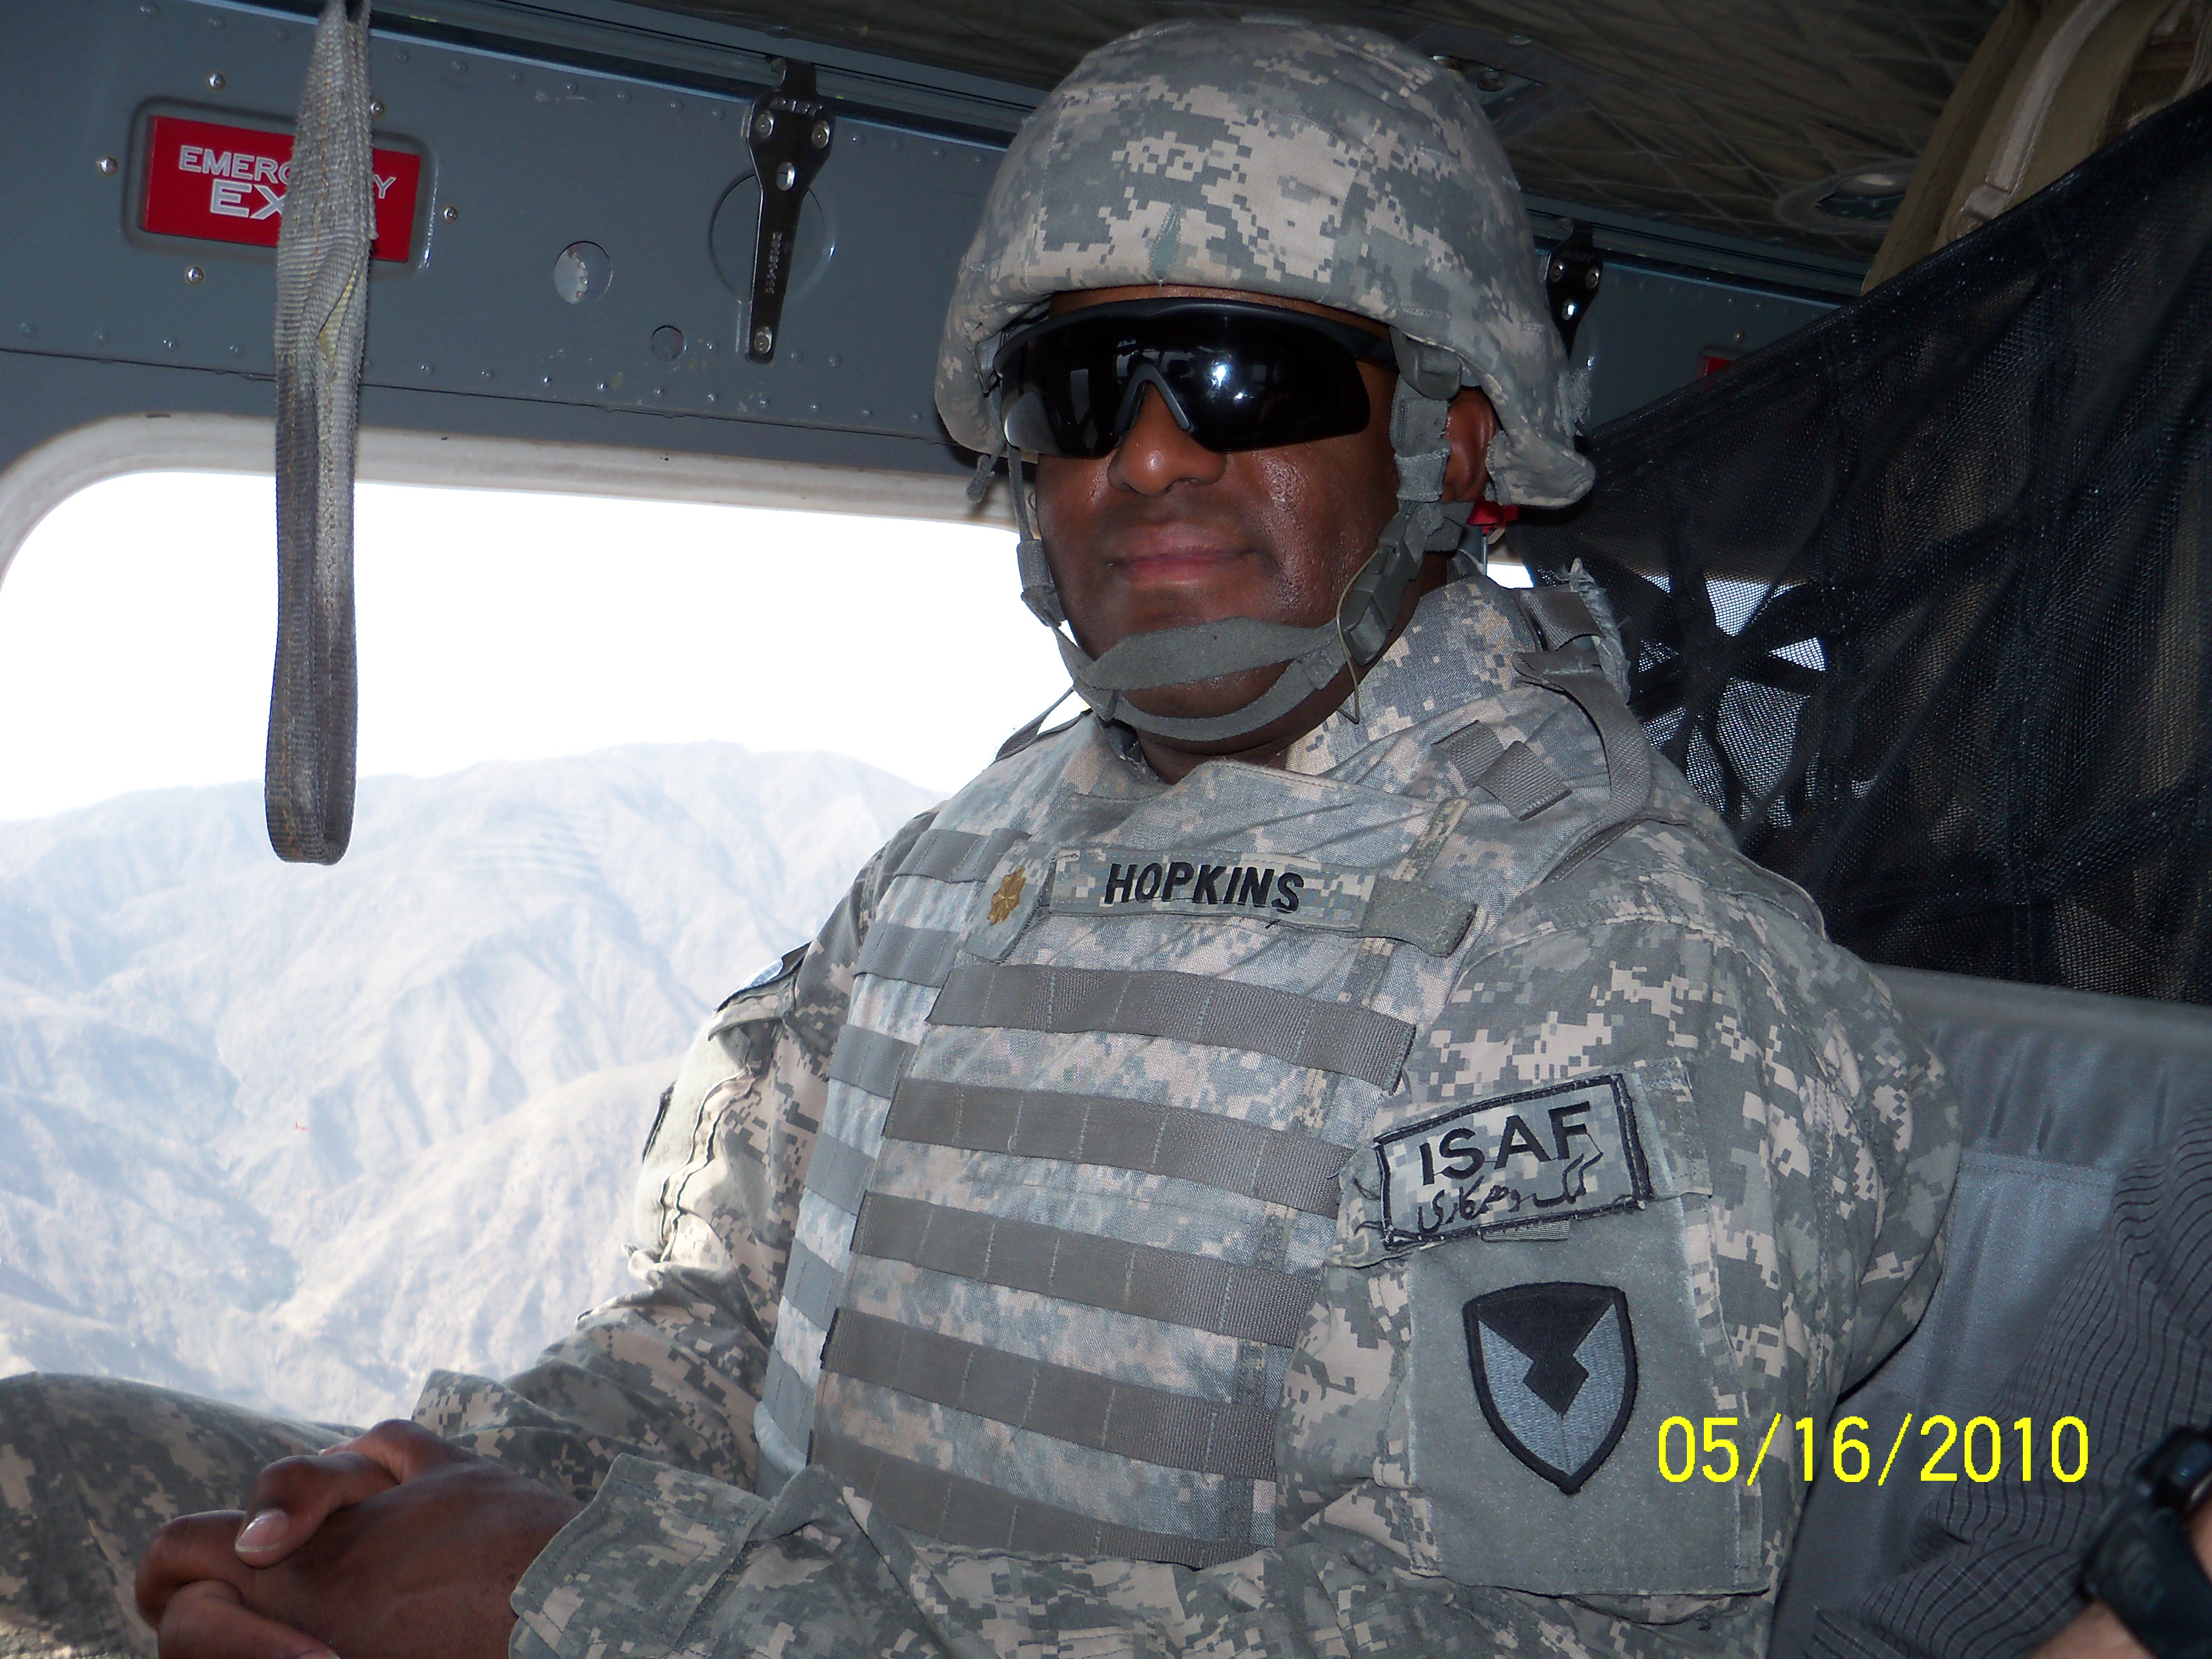 Although in the military for 25 years, Maj. Hopkins' deployment to Afghanistan is his first combat assignment.